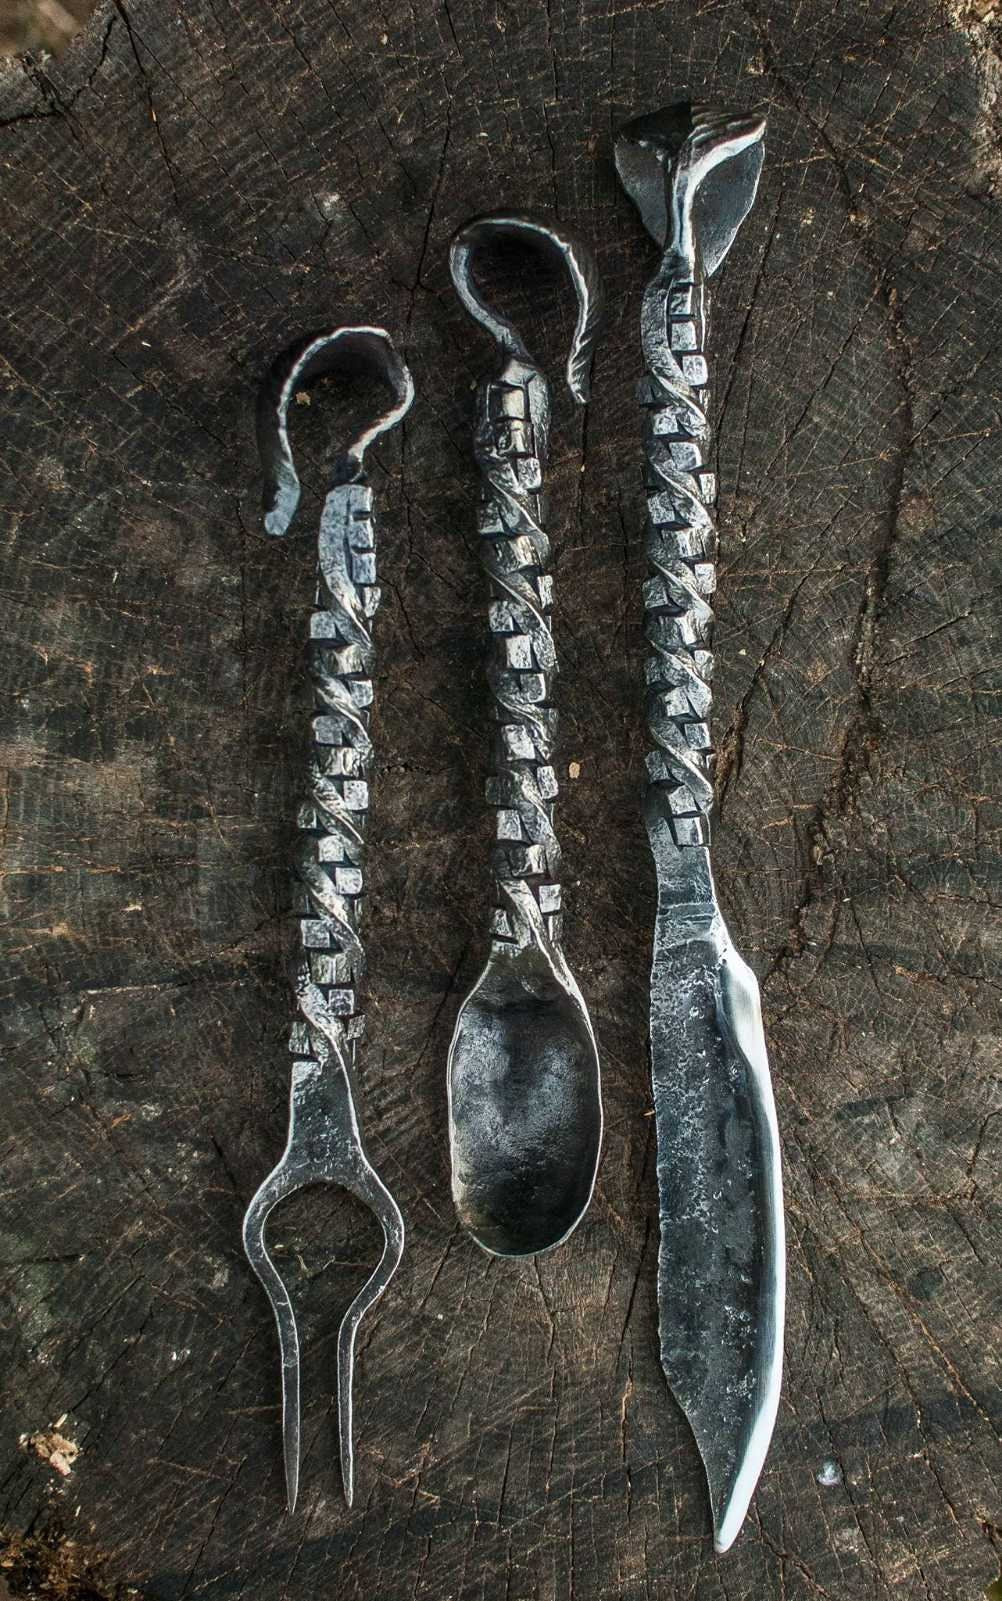 Spoon, fork, knife, cutlery, medieval, viking food, grill tools, fireplace, BBQ, skewers, birthday, anniversary, Christmas, camping, picnic